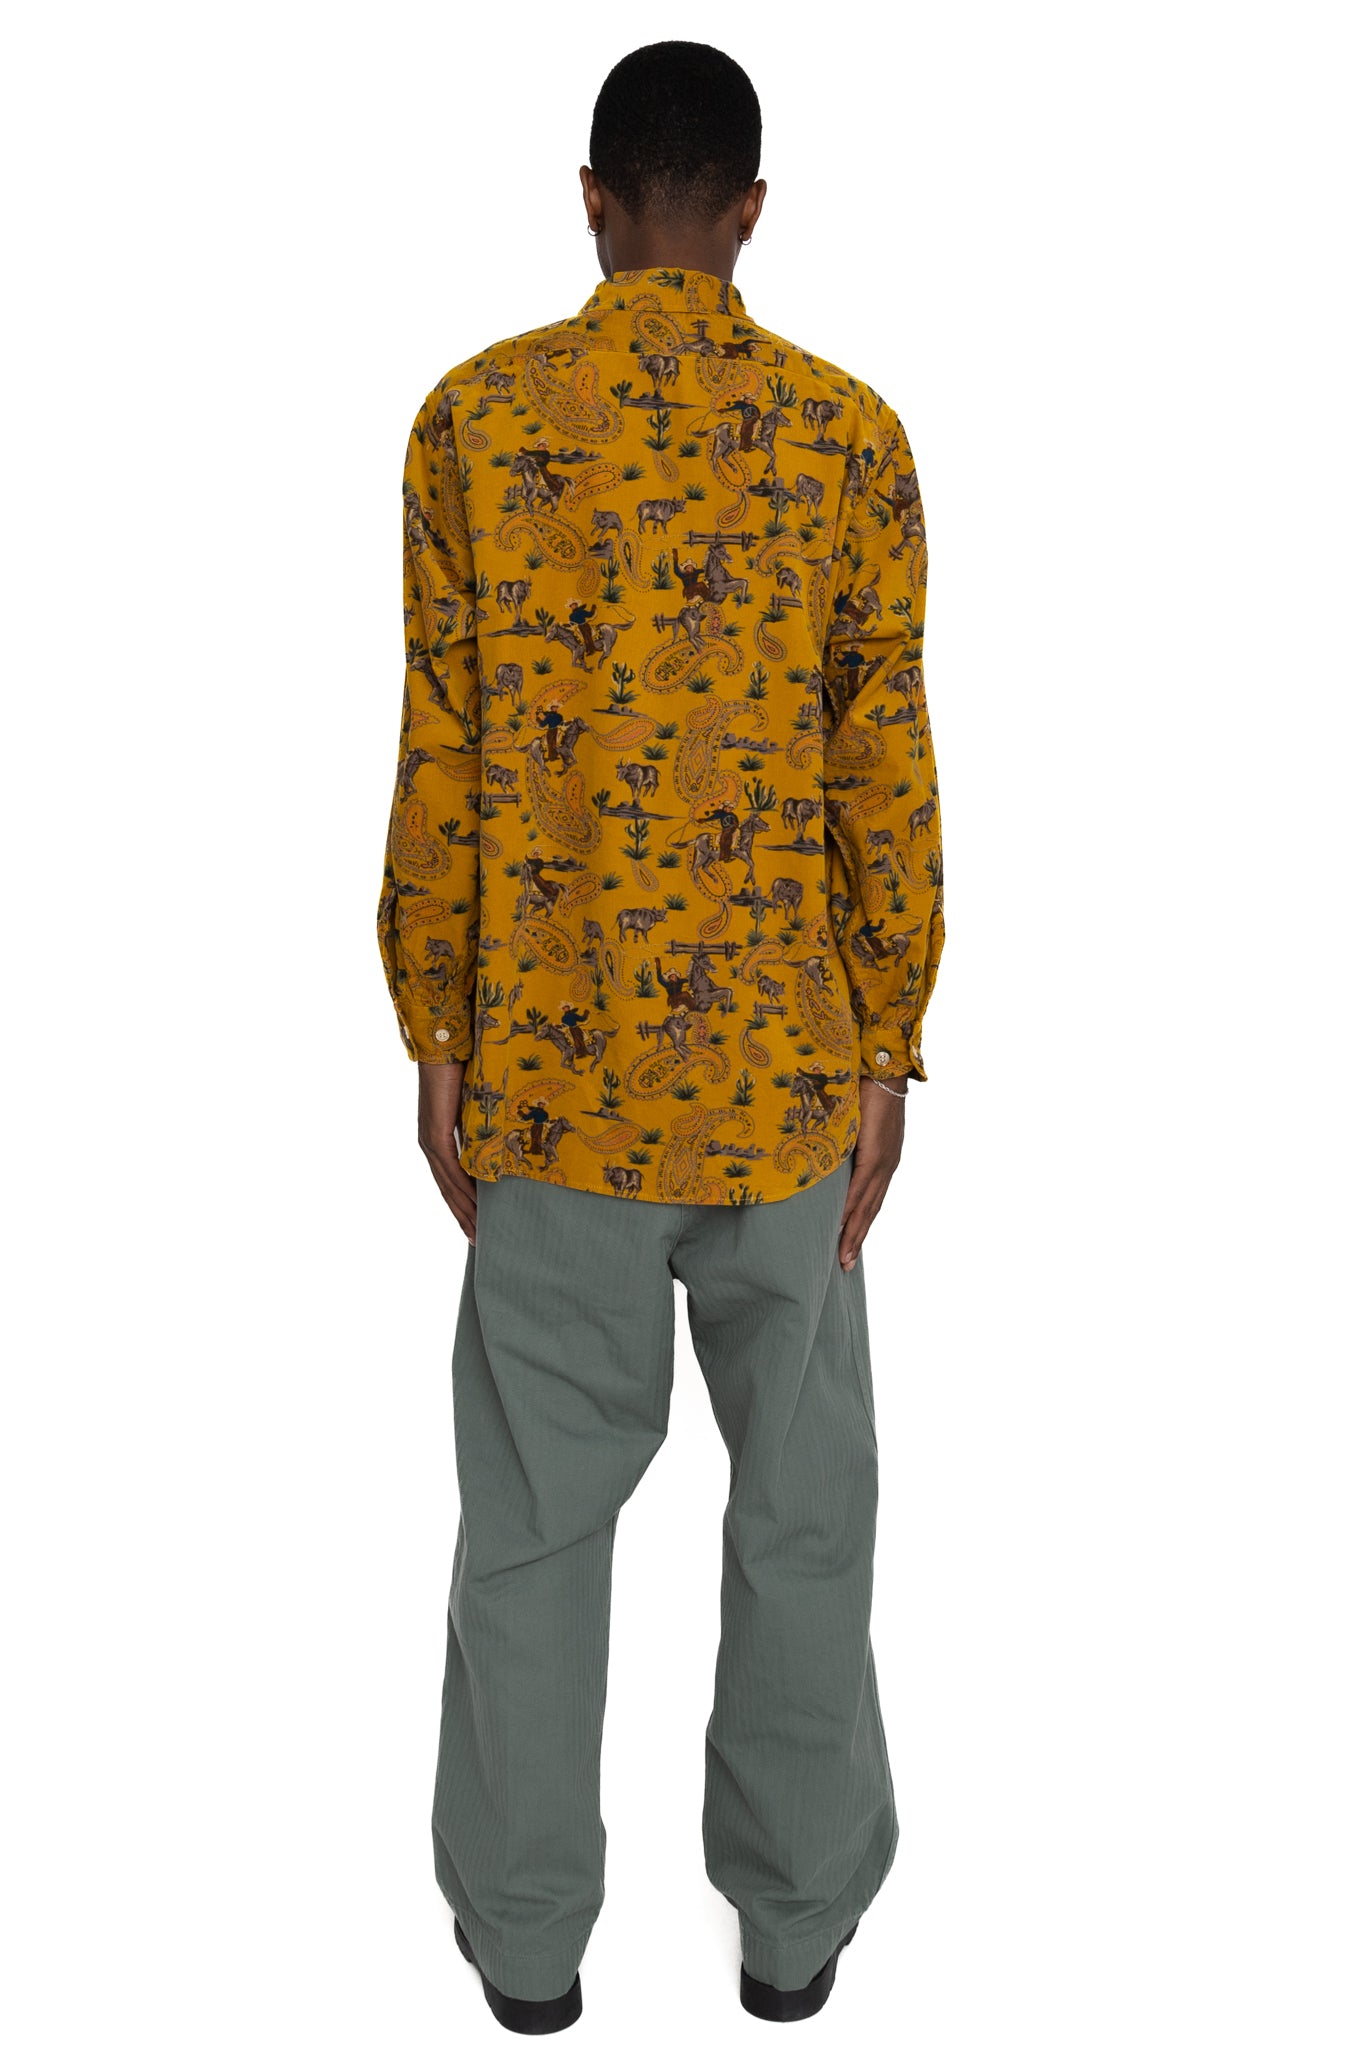 WORK Classic Fit Cowboy Print - Yellow